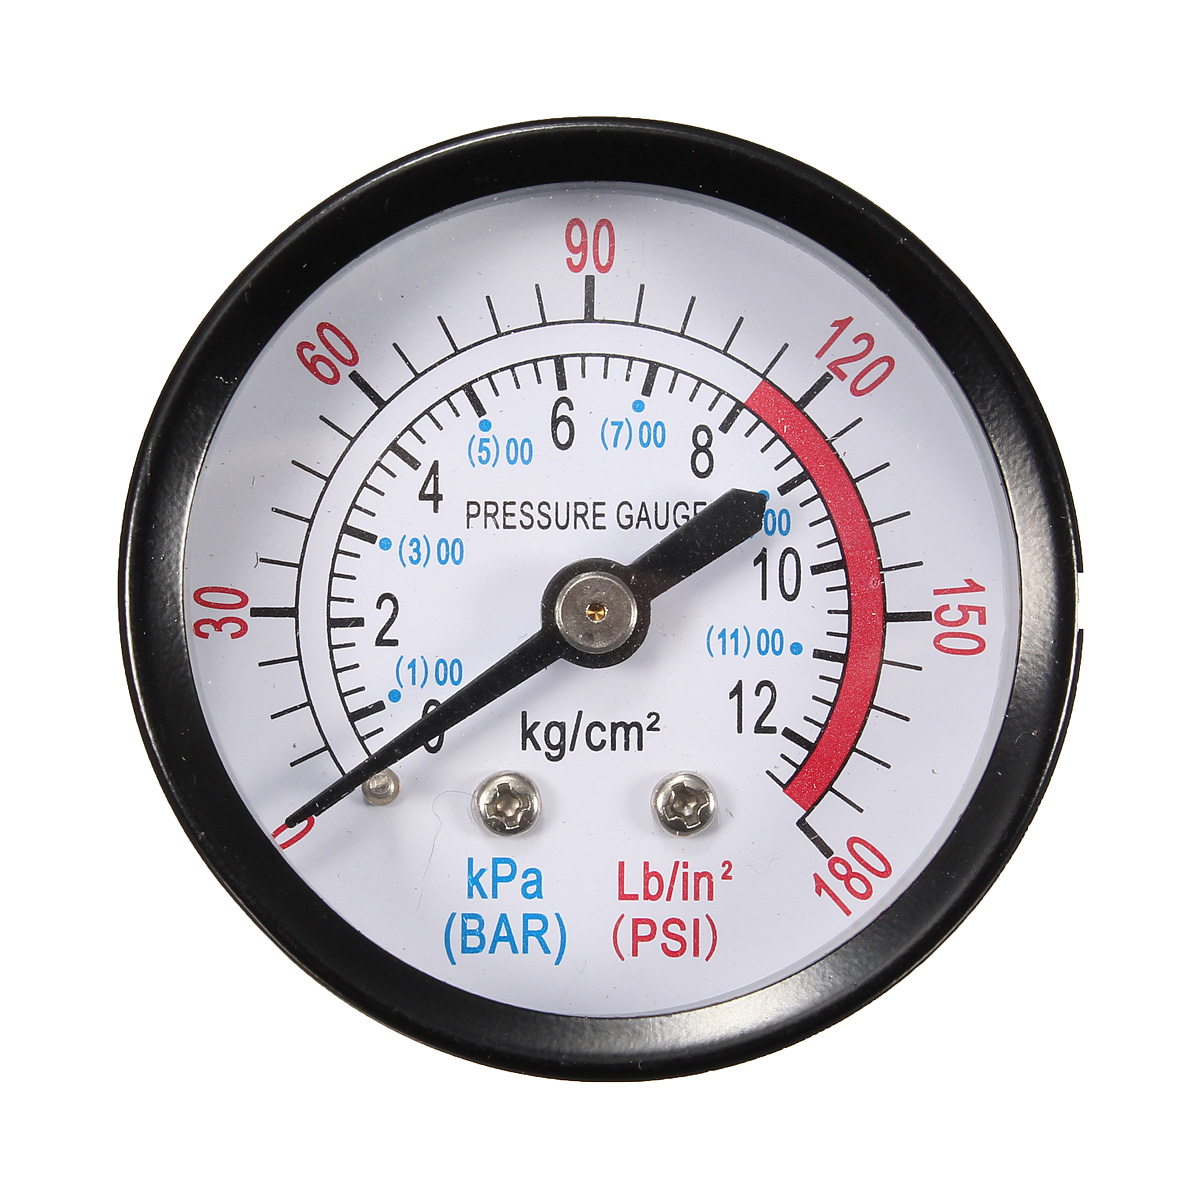 Bar-Air-Pressure-Gauge-13mm-14-BSP-Thread-0-180-PSI-0-12-Manometer-Double-Scale-For-Air-Compressor-1363132-1